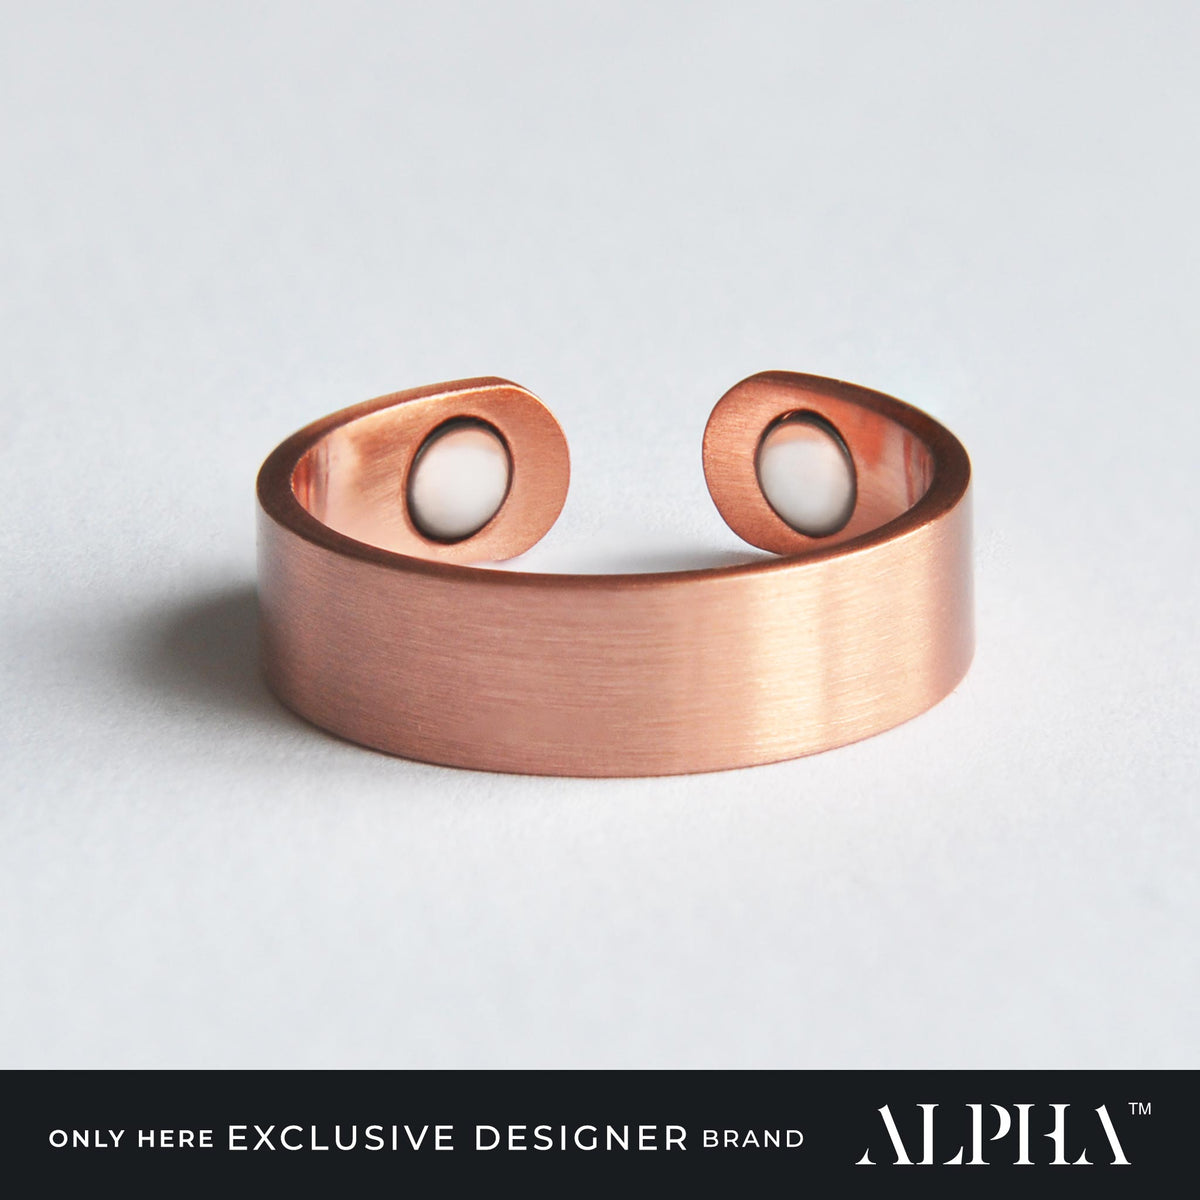 The Surprising Health Benefits of Wearing a Copper Ring - News24